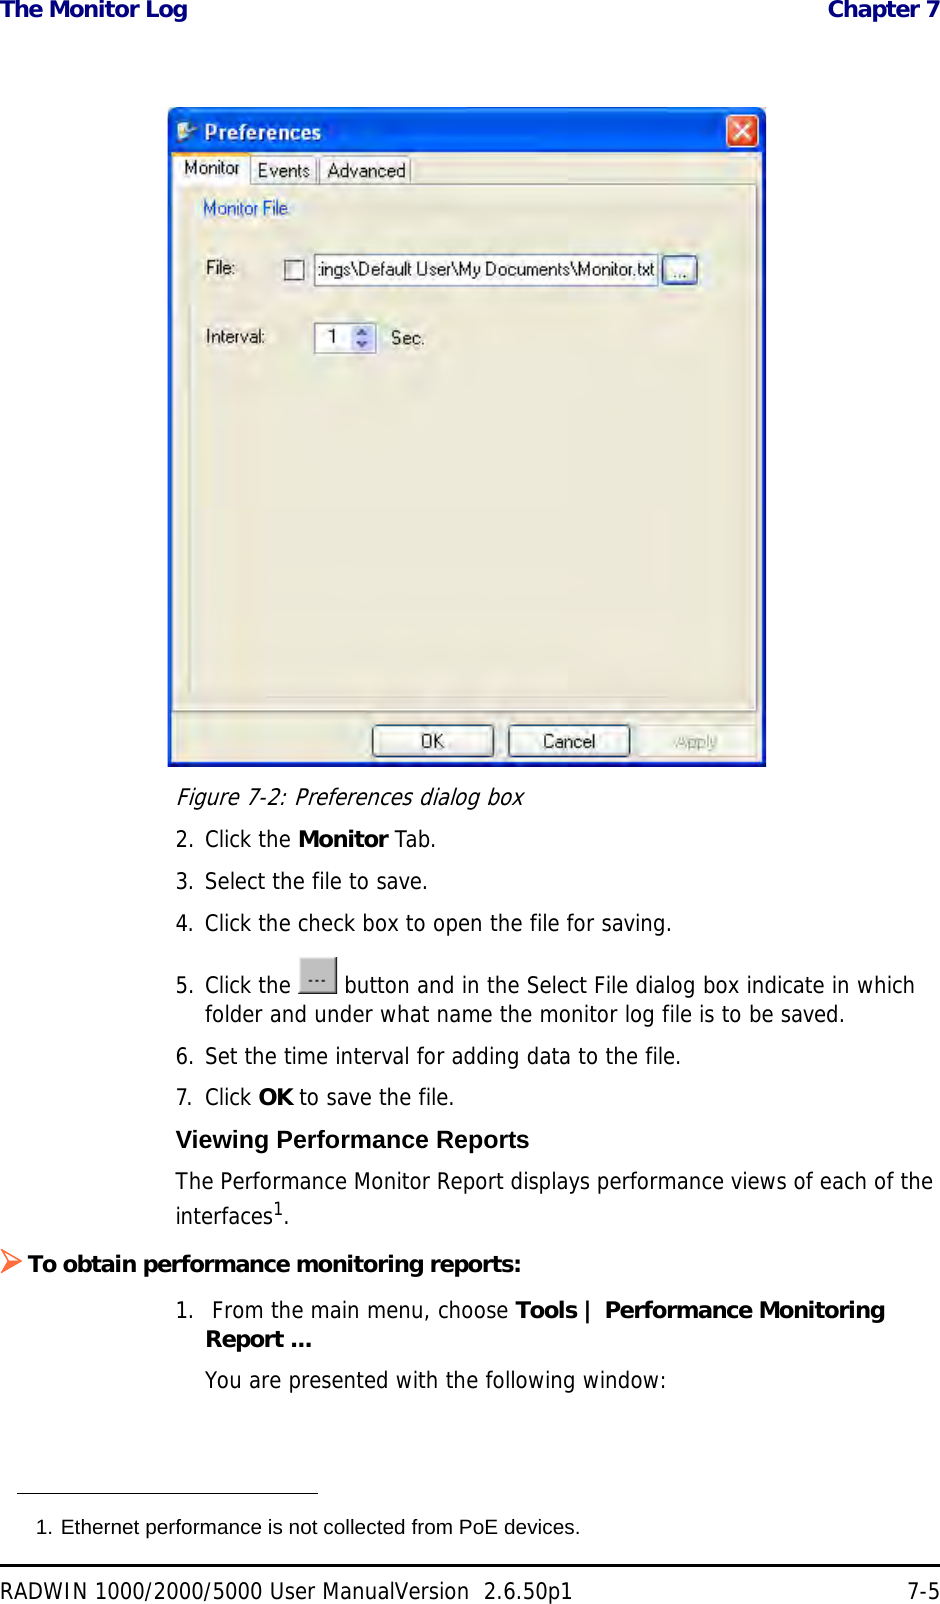 The Monitor Log  Chapter 7RADWIN 1000/2000/5000 User ManualVersion  2.6.50p1 7-5Figure 7-2: Preferences dialog box2. Click the Monitor Tab.3. Select the file to save.4. Click the check box to open the file for saving.5. Click the   button and in the Select File dialog box indicate in which folder and under what name the monitor log file is to be saved.6. Set the time interval for adding data to the file.7. Click OK to save the file.Viewing Performance ReportsThe Performance Monitor Report displays performance views of each of the interfaces1.To obtain performance monitoring reports:1.  From the main menu, choose Tools | Performance Monitoring Report ...You are presented with the following window:1. Ethernet performance is not collected from PoE devices.